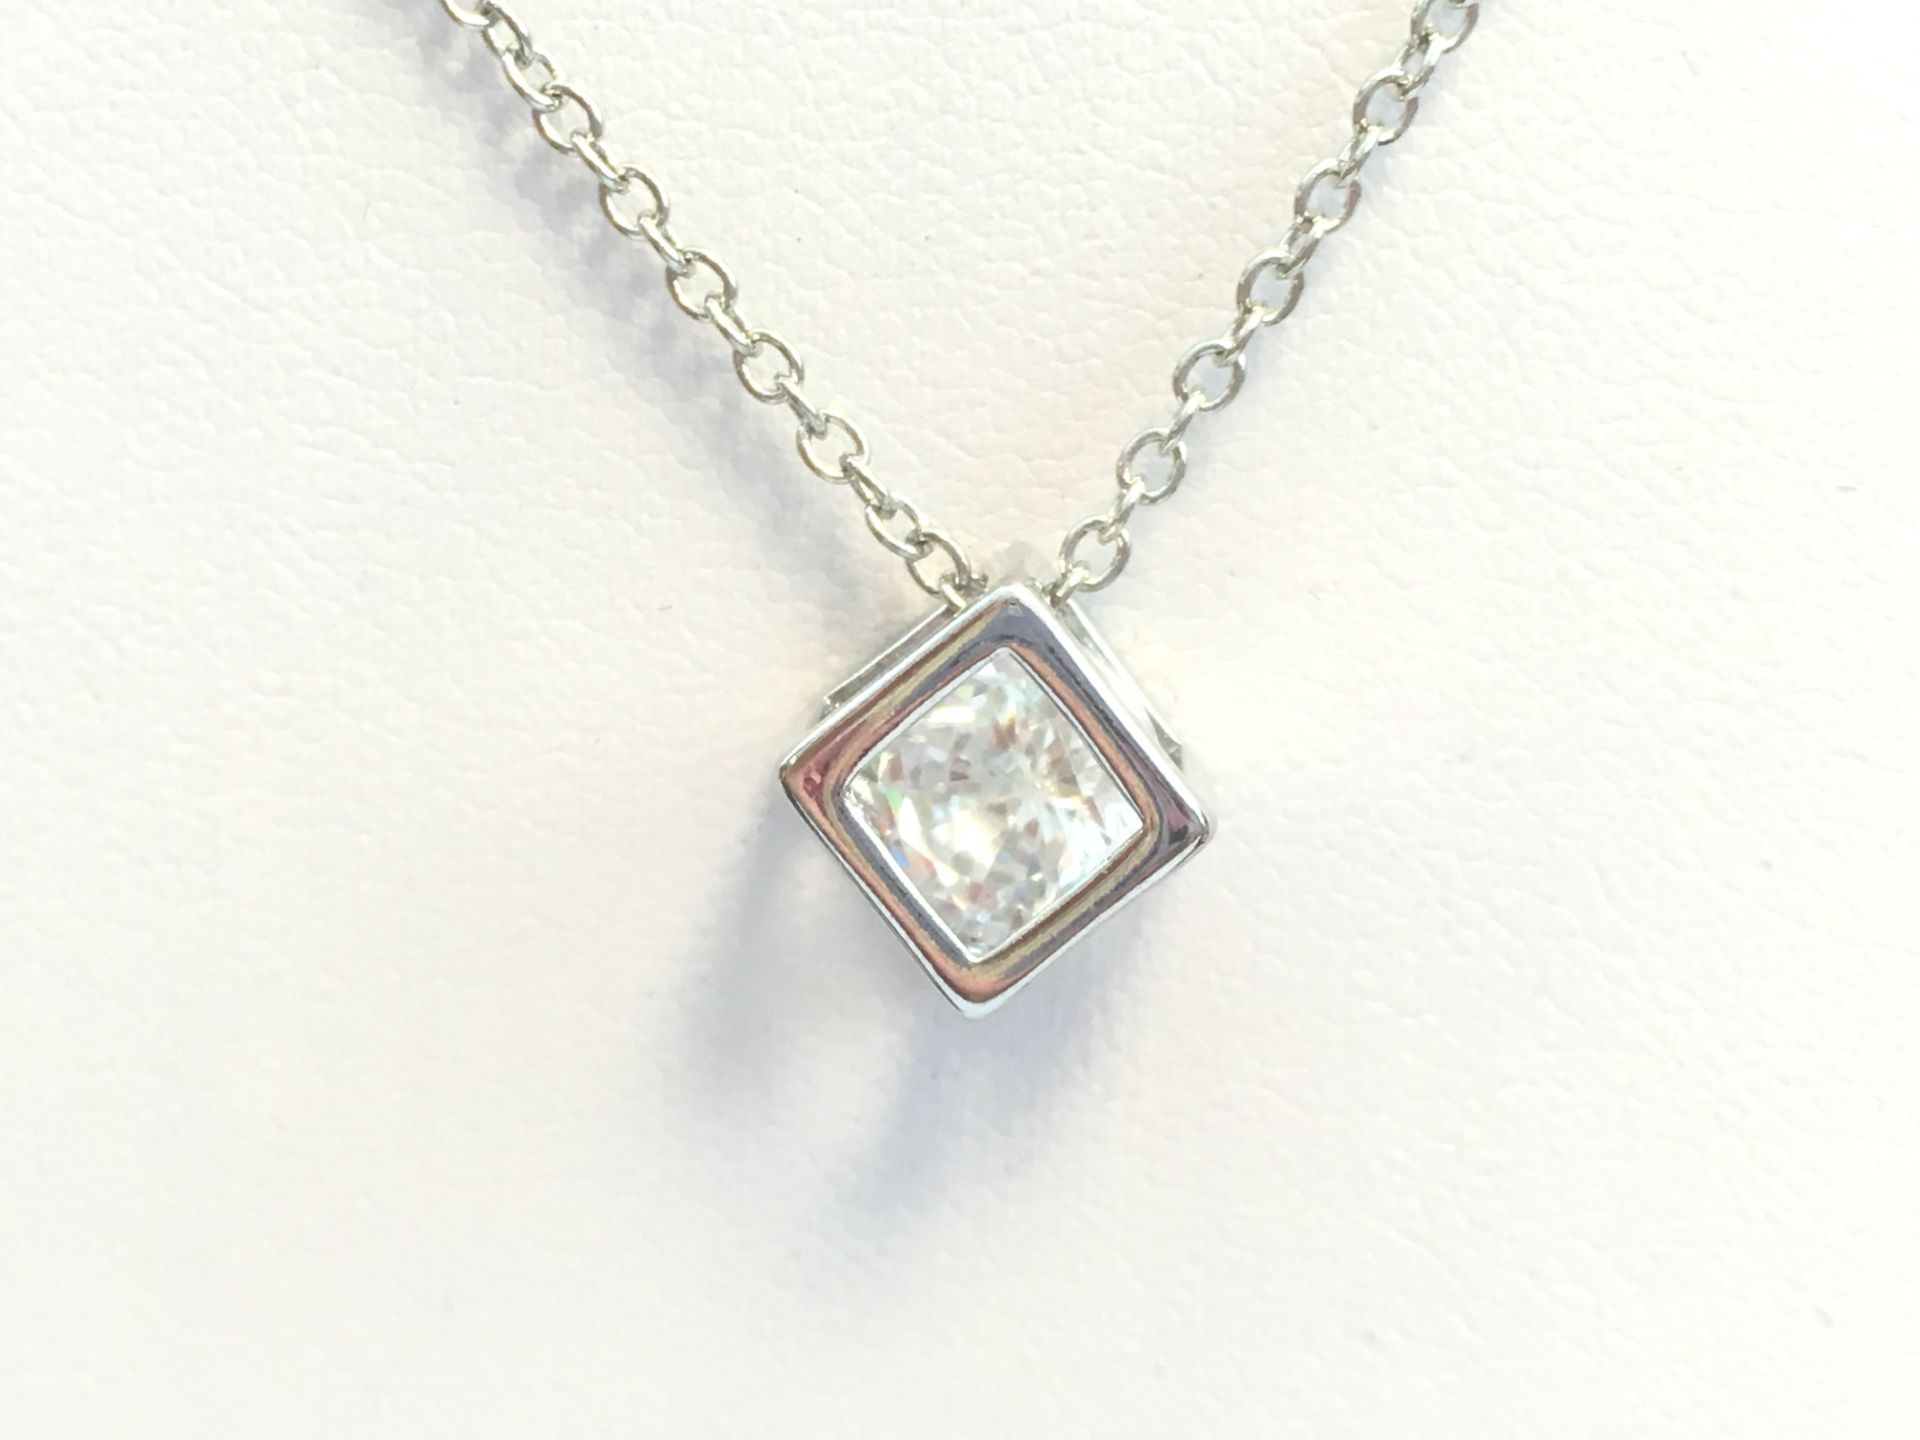 Silver Necklace and Earring set with Swarovski Crystal - Image 2 of 4